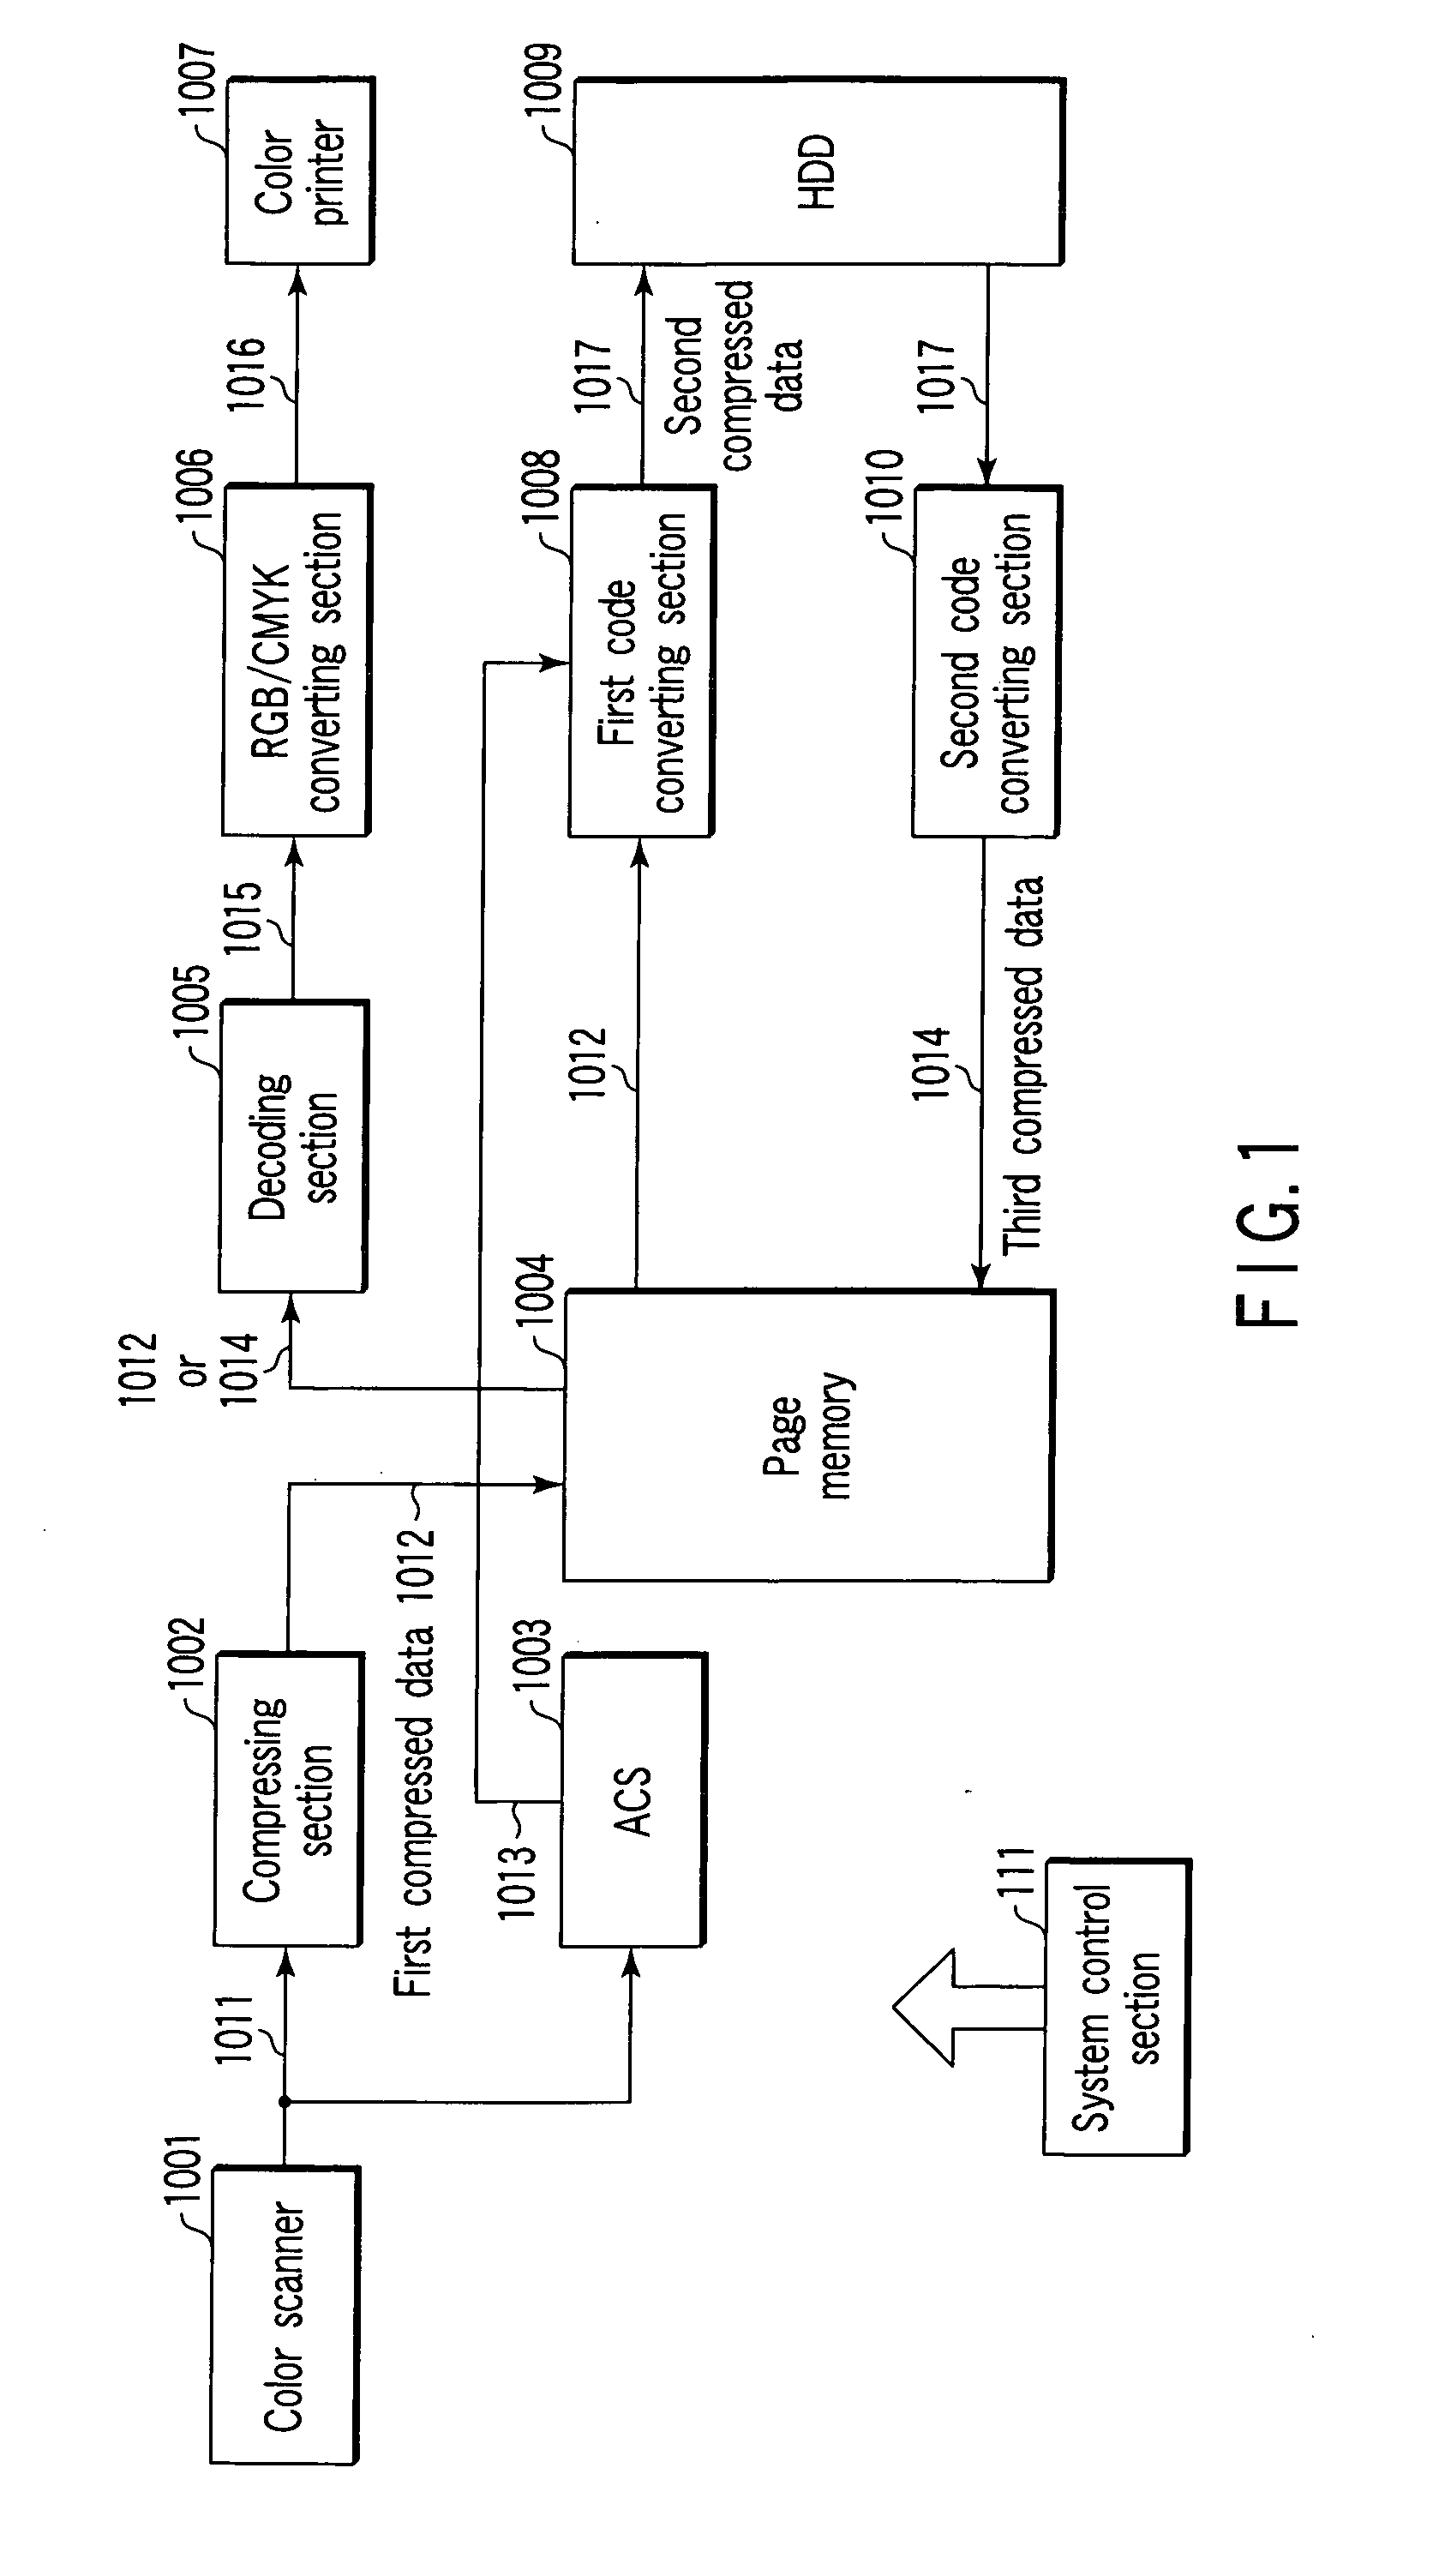 Apparatus for image processing